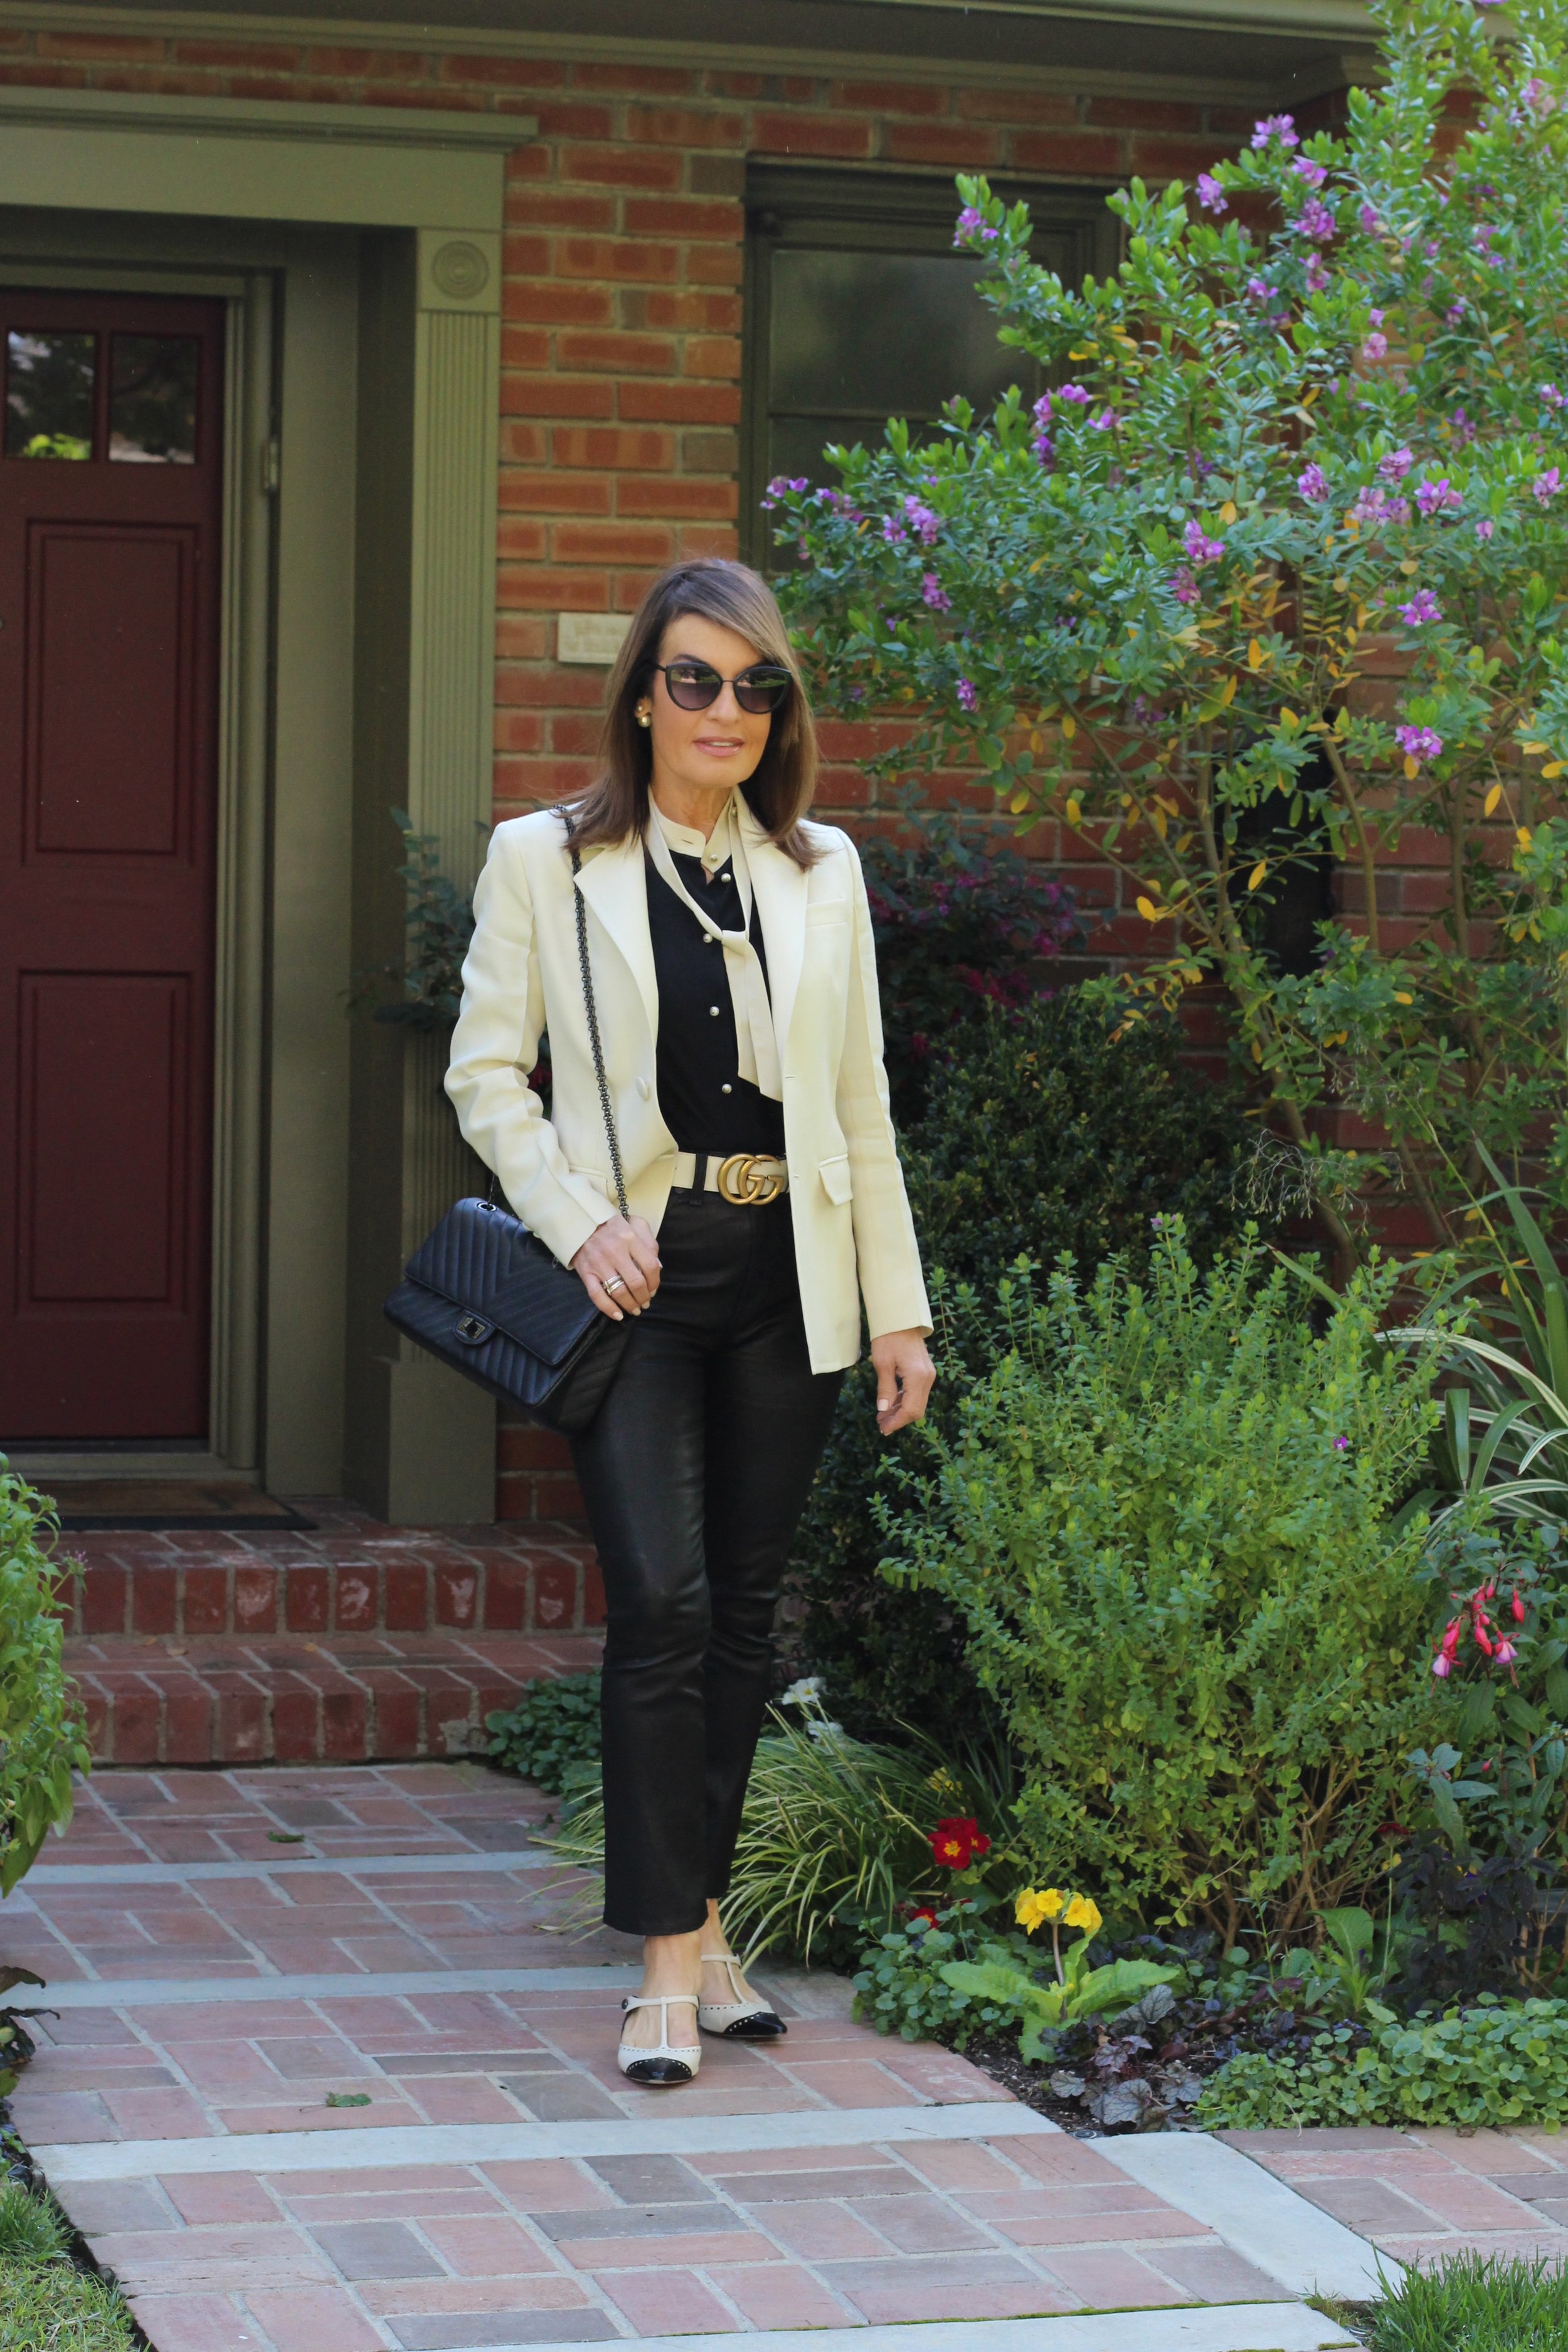 Bally Blazer, Gucci Blouse and Belt, Rag and Bone Leather Jeans, Dior Mules and Tribal Earrings, Spinelli Kilcollin Ring, Chanel handbag and Sunglasses.